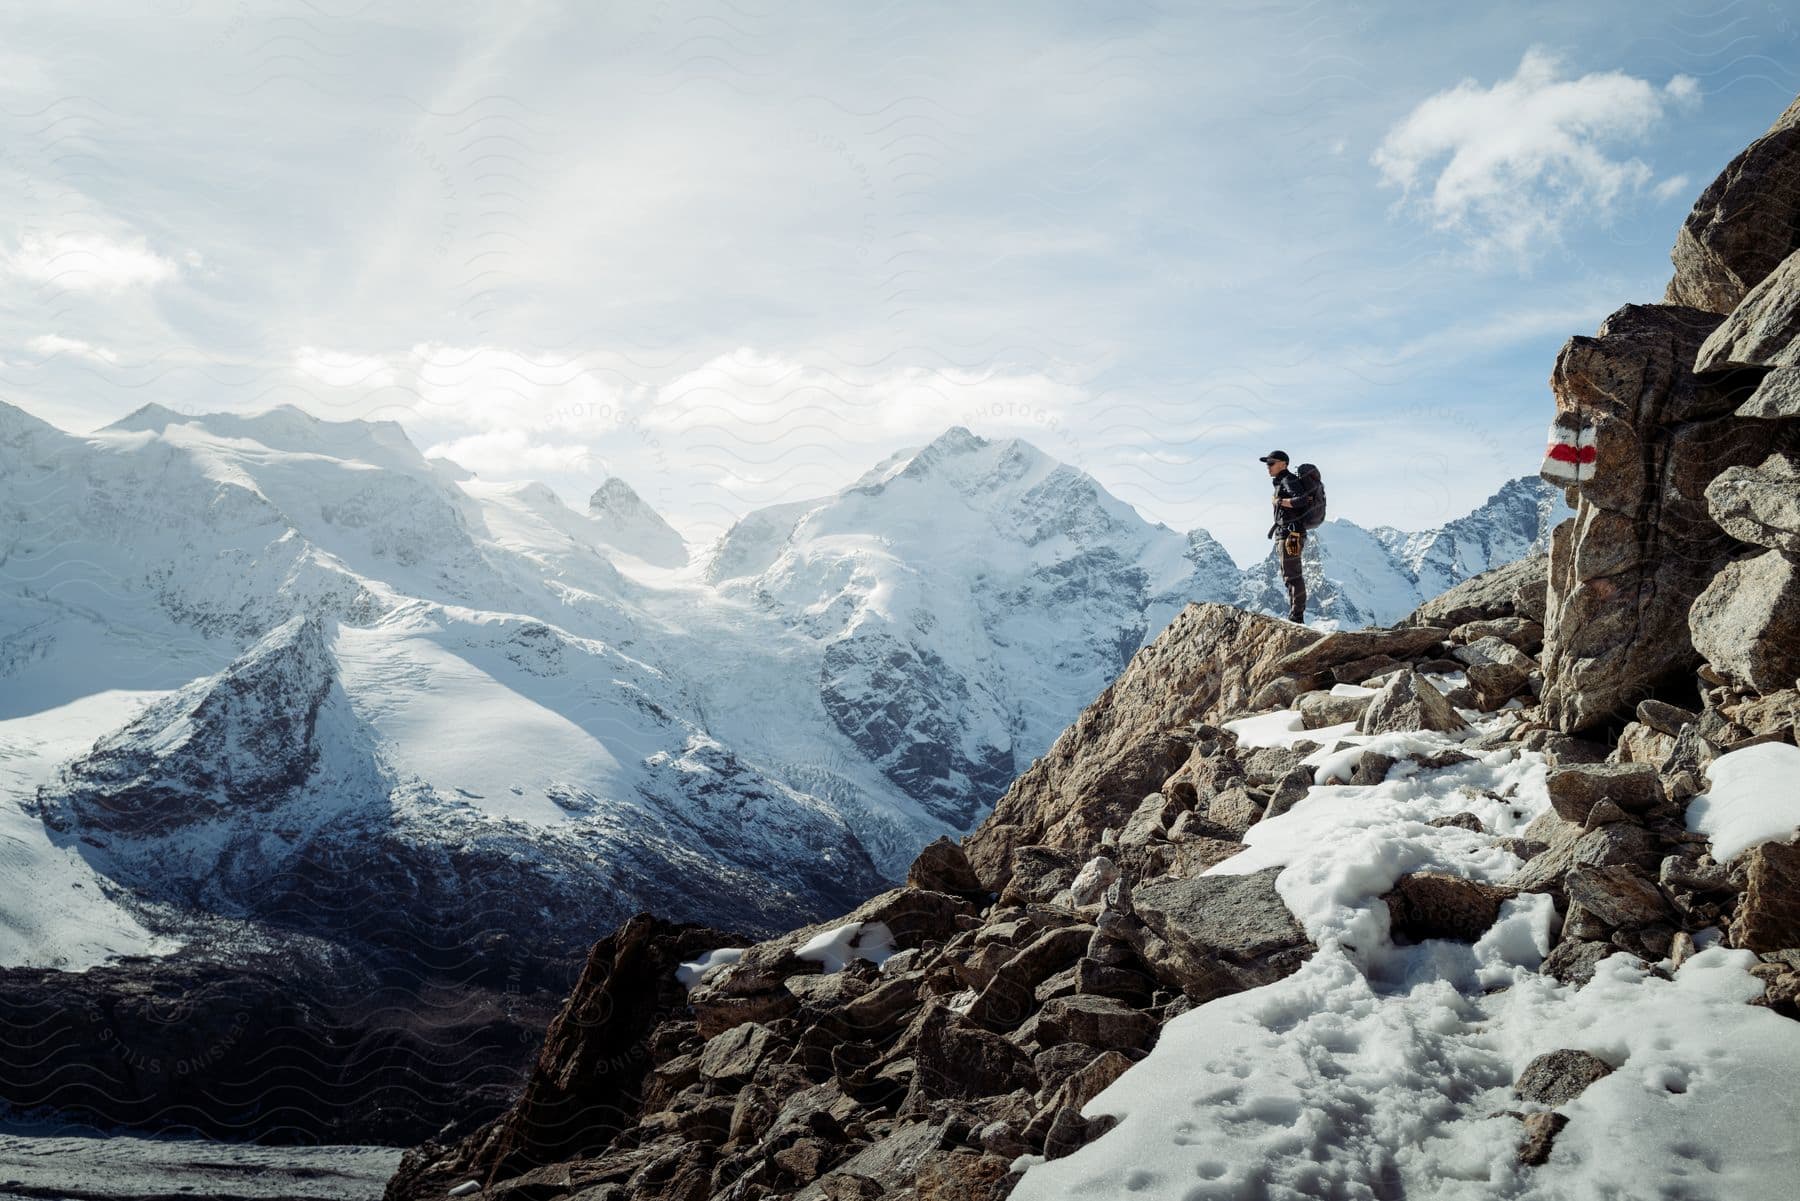 Man standing on a mountain peak surrounded by snowcapped mountains